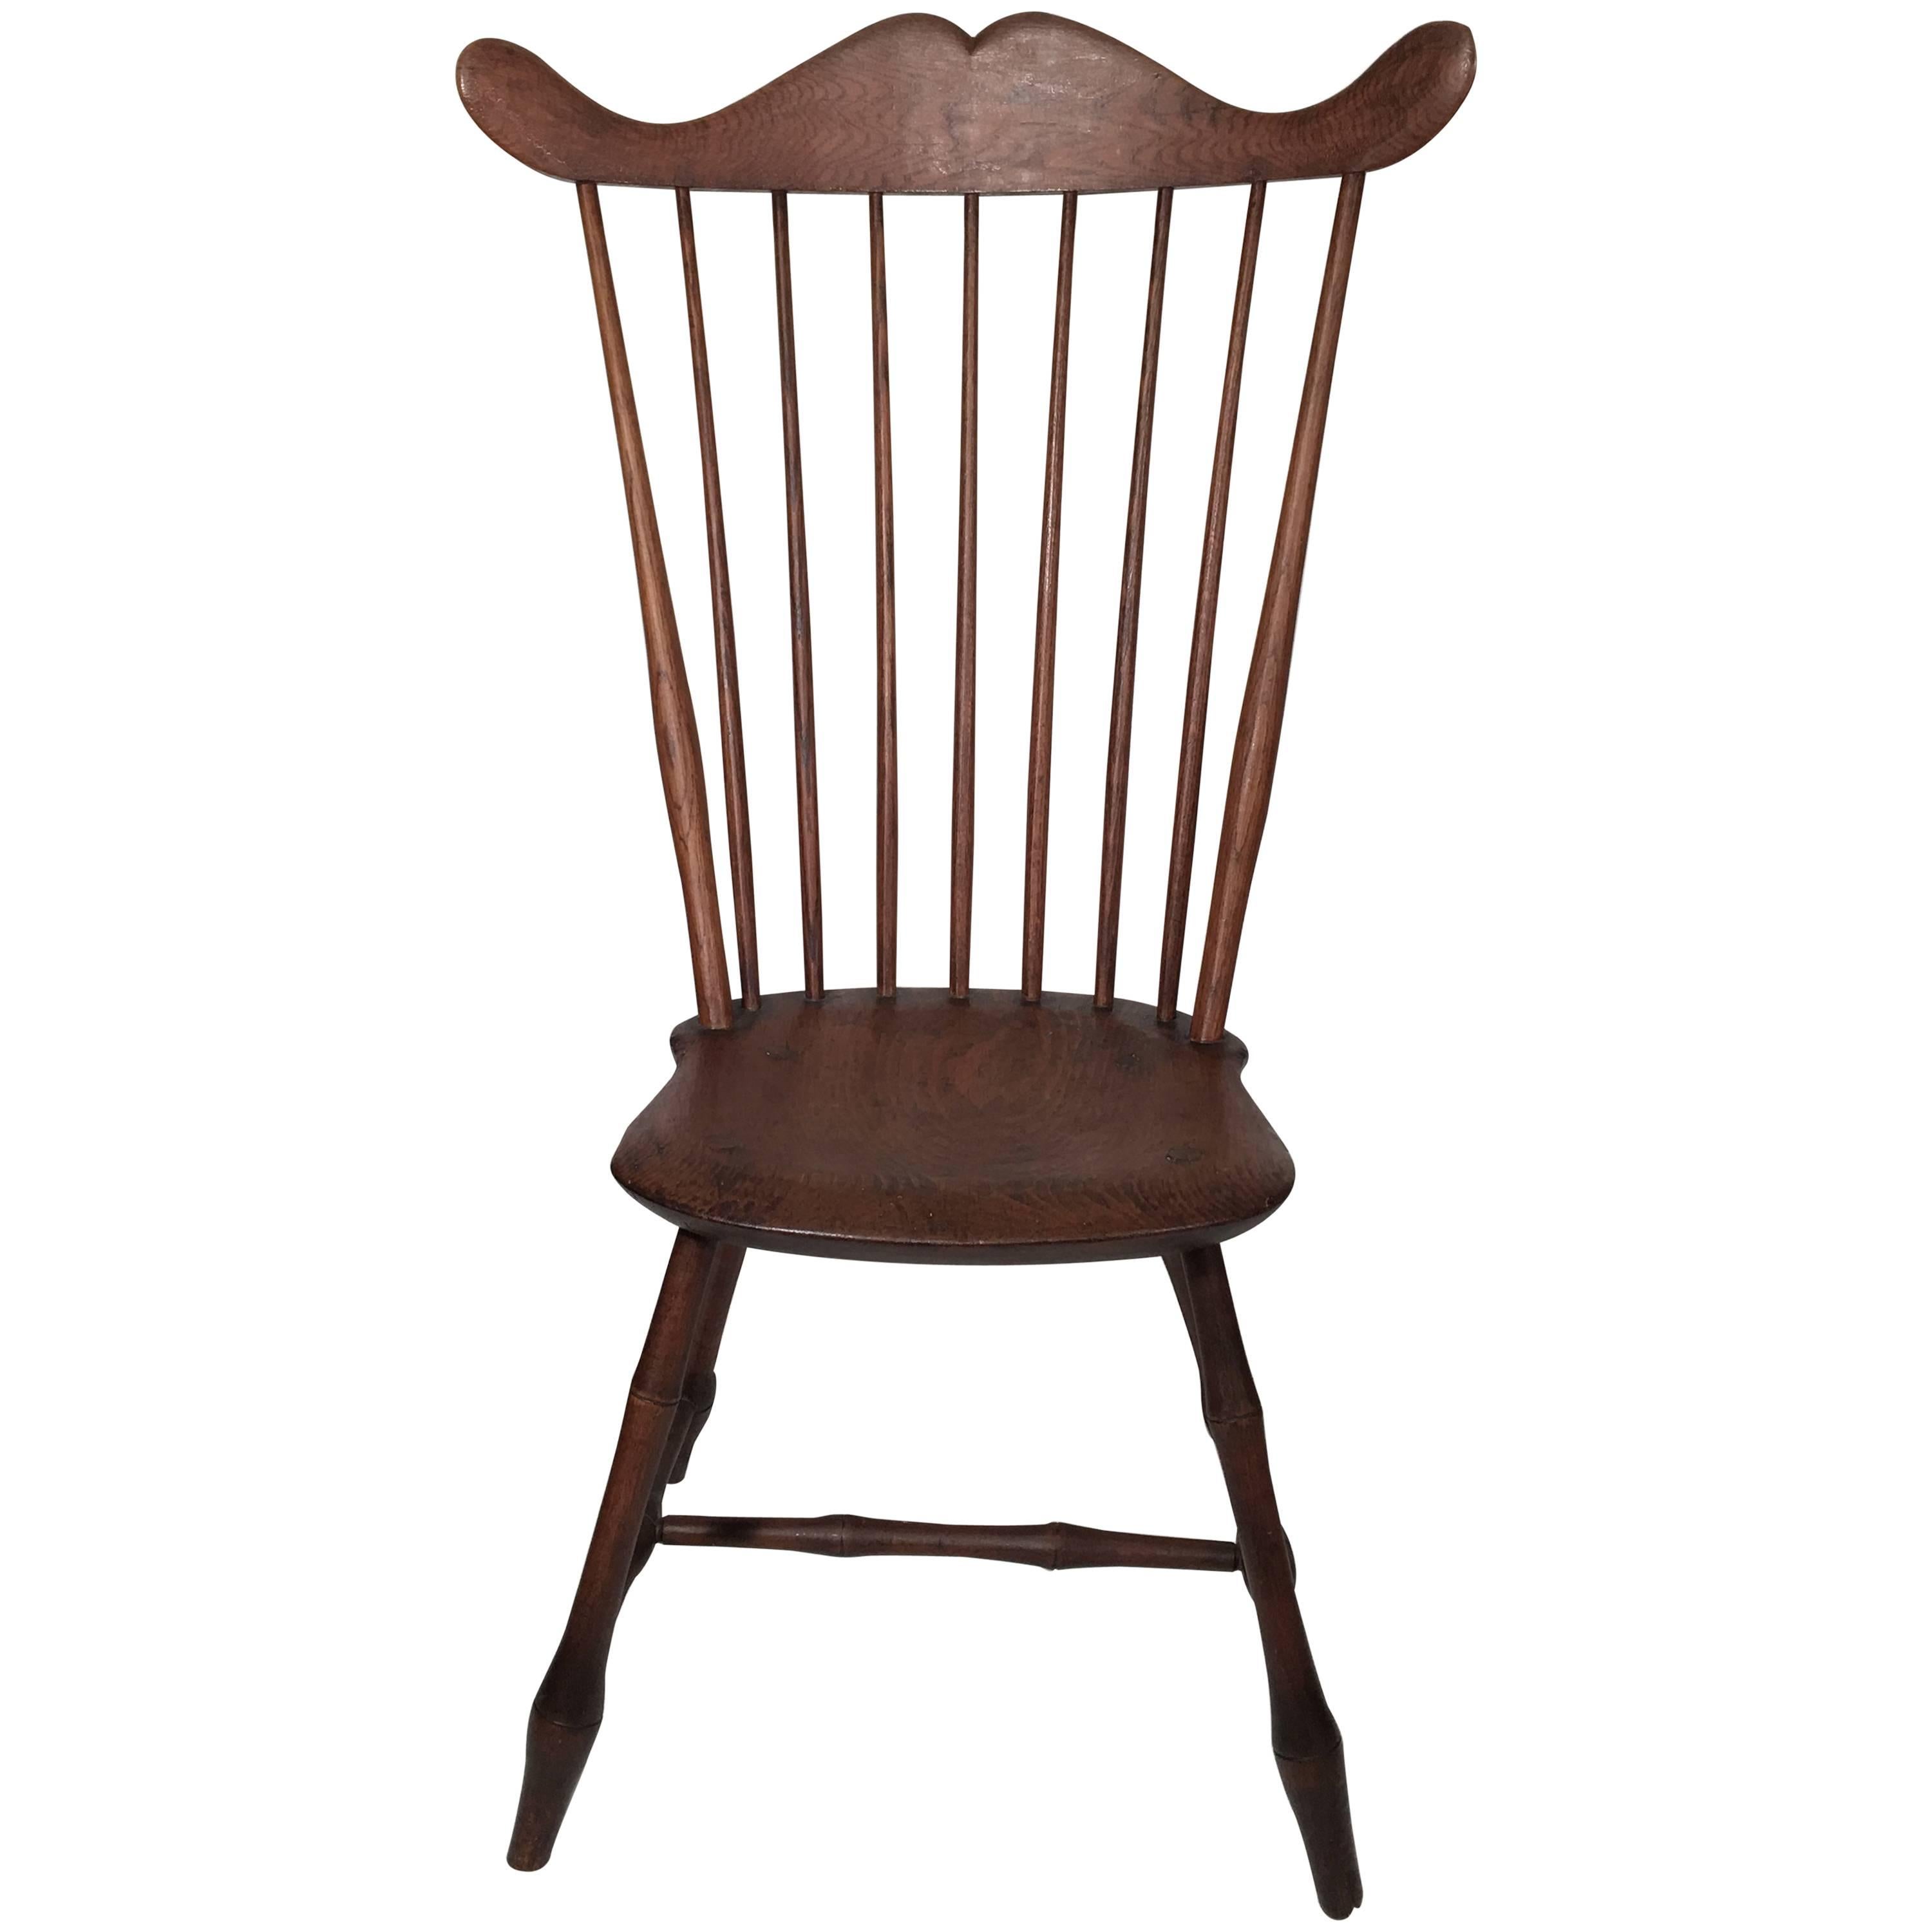 Uncommon New Hampshire Windsor Chair